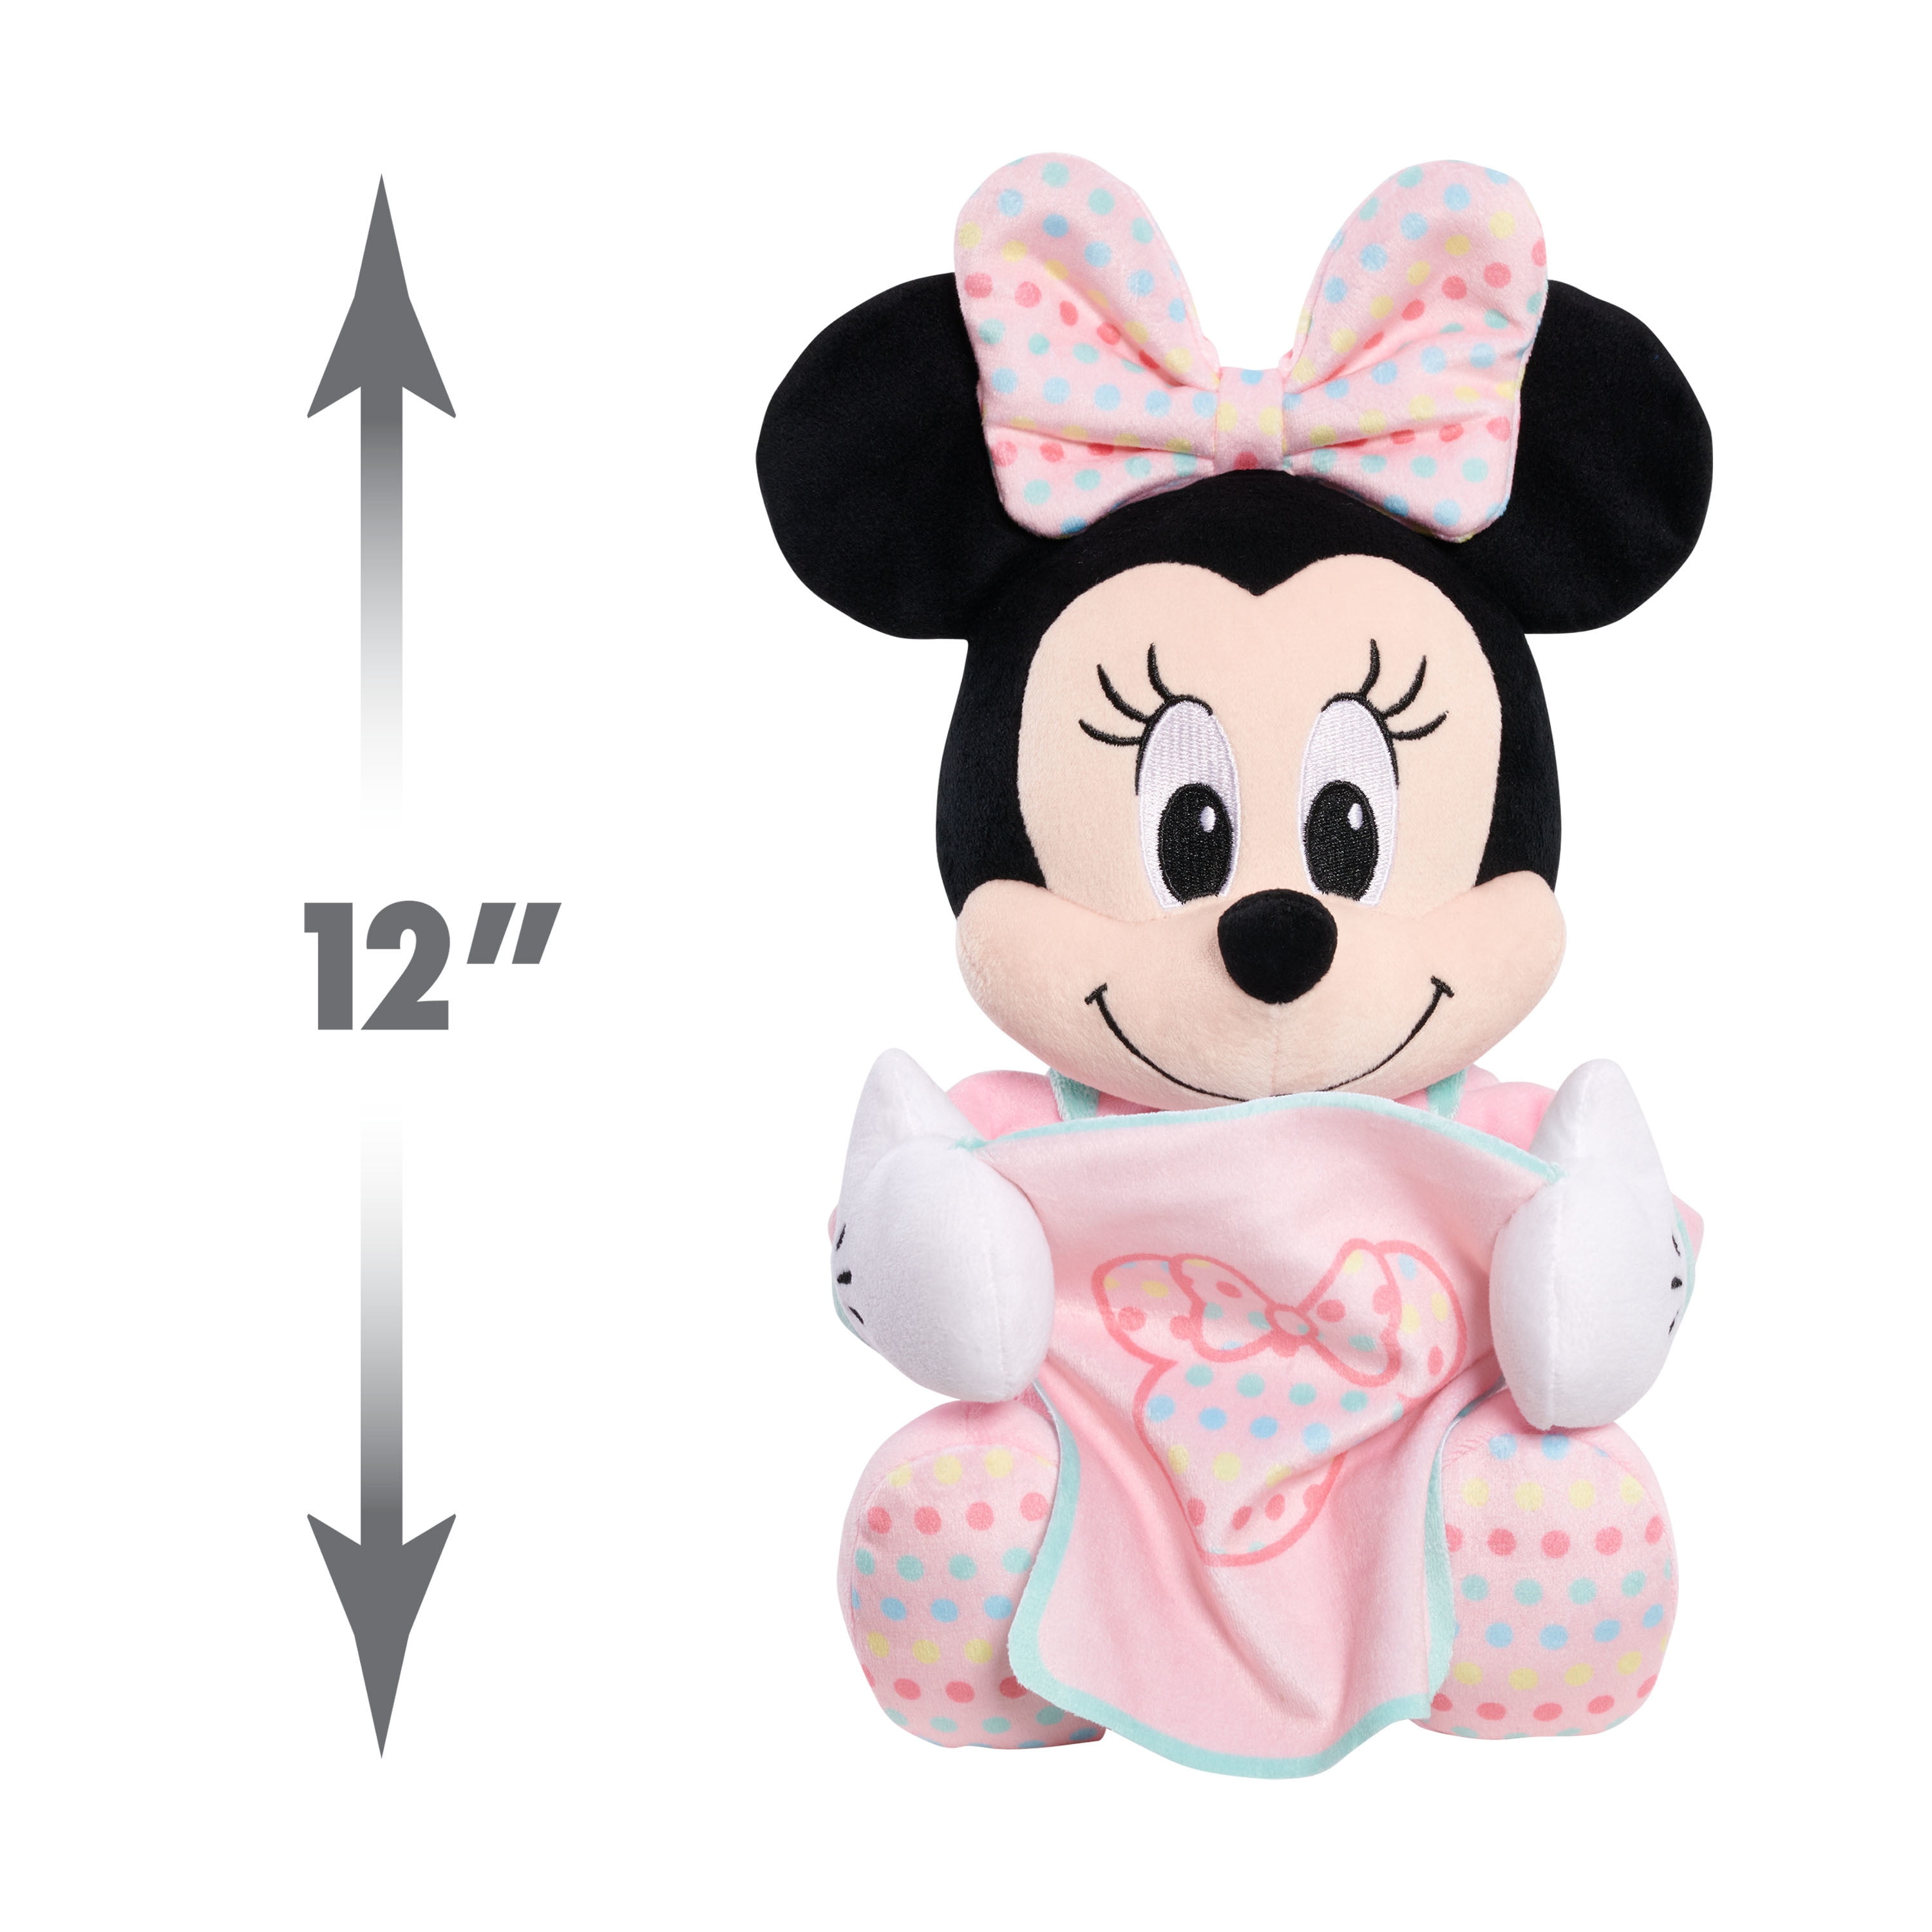 Disney Baby 11-inch Hide-and-Seek Mickey Mouse Interactive Plush, Pretend  Play, Kids Toys for Ages 09 Month by Just Play